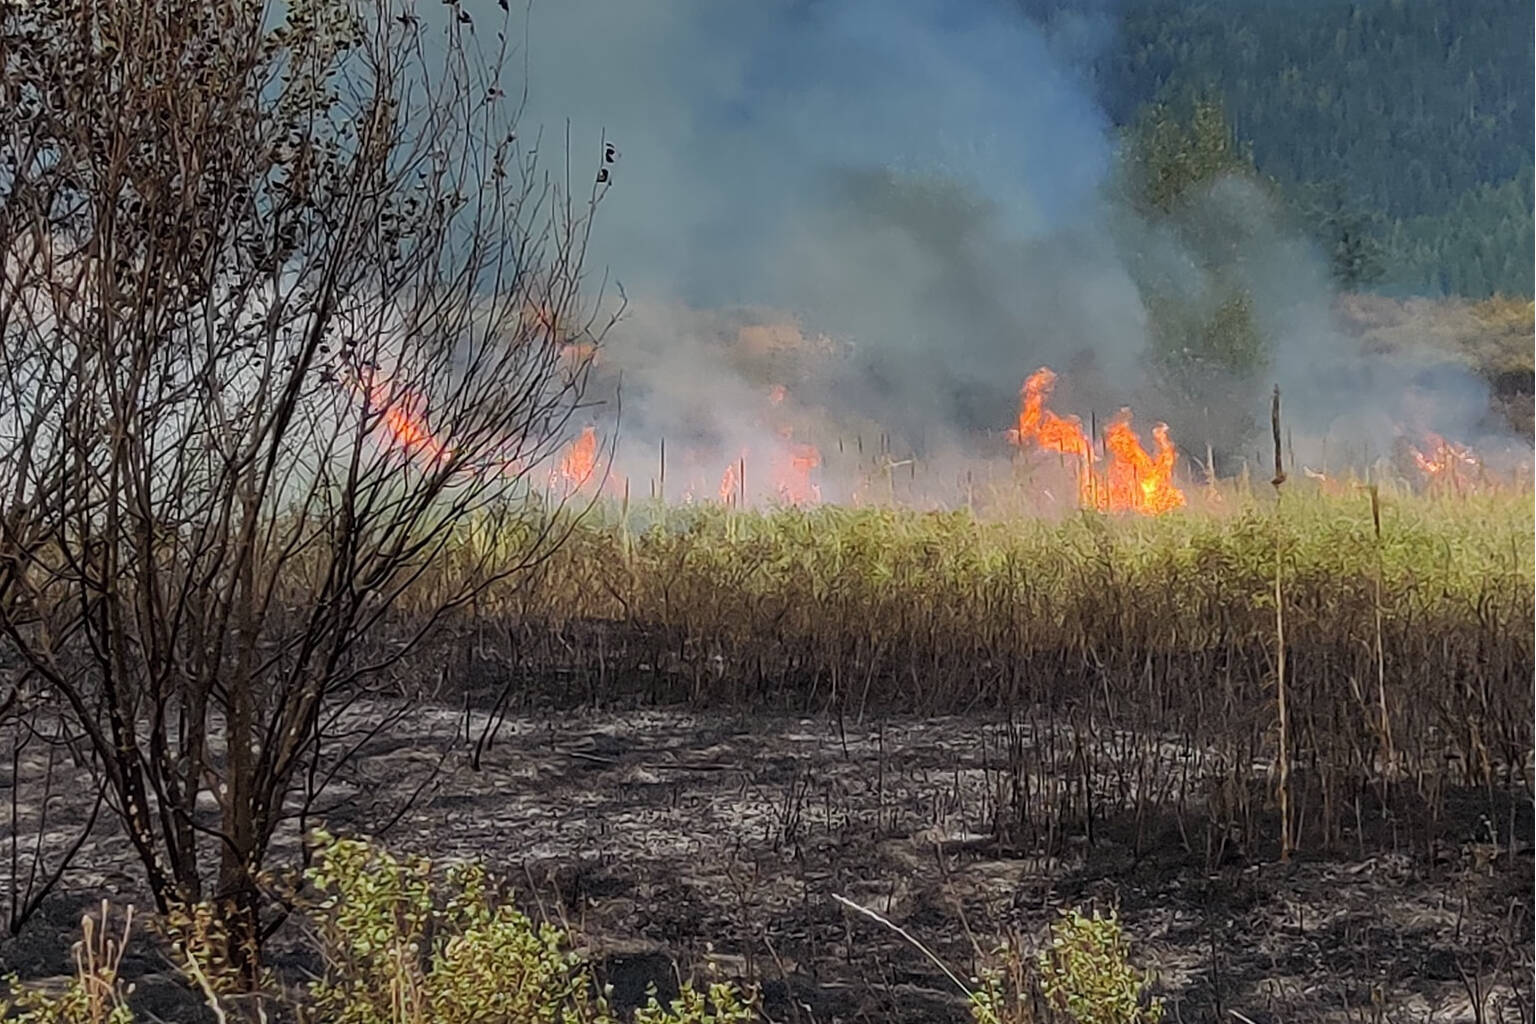 The Cosens Creek wildfire in Kalamalka Lake Provincial Park in Coldstream, which began Friday, Aug. 19, has been classified as out as of Sunday, Aug. 21. (Coldstream Fire Department photo)